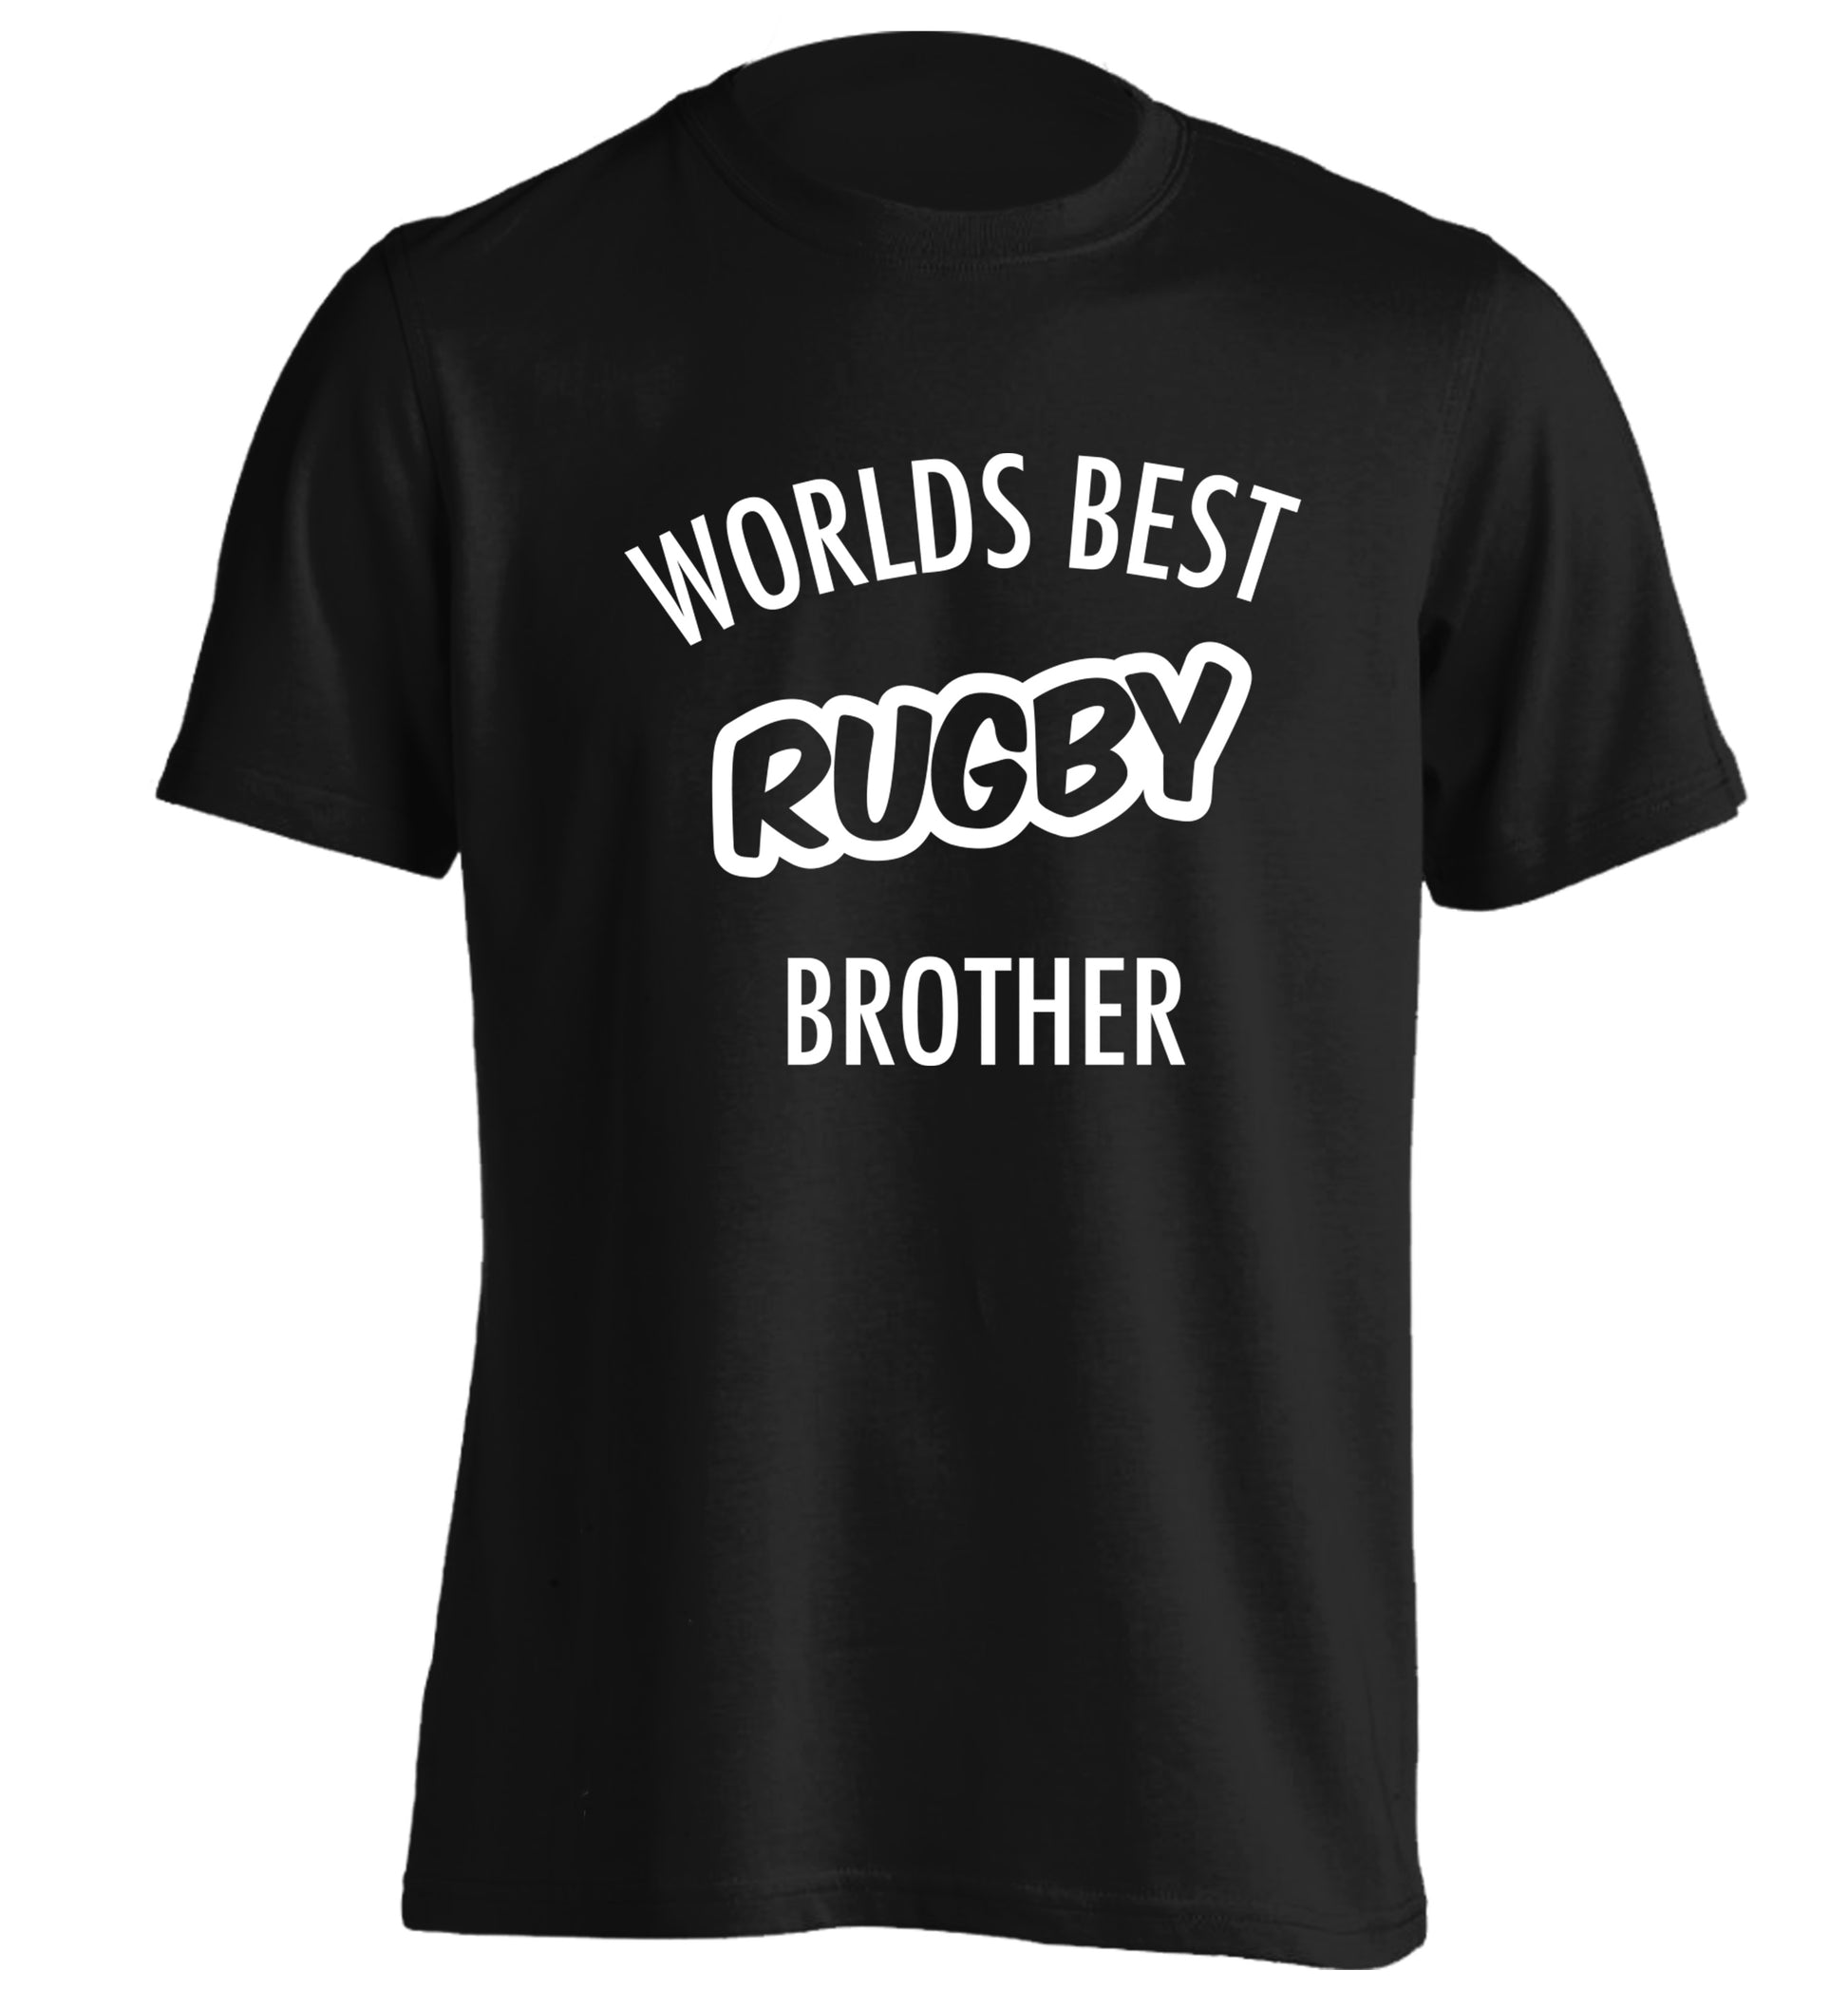 Worlds best rugby brother adults unisex black Tshirt 2XL